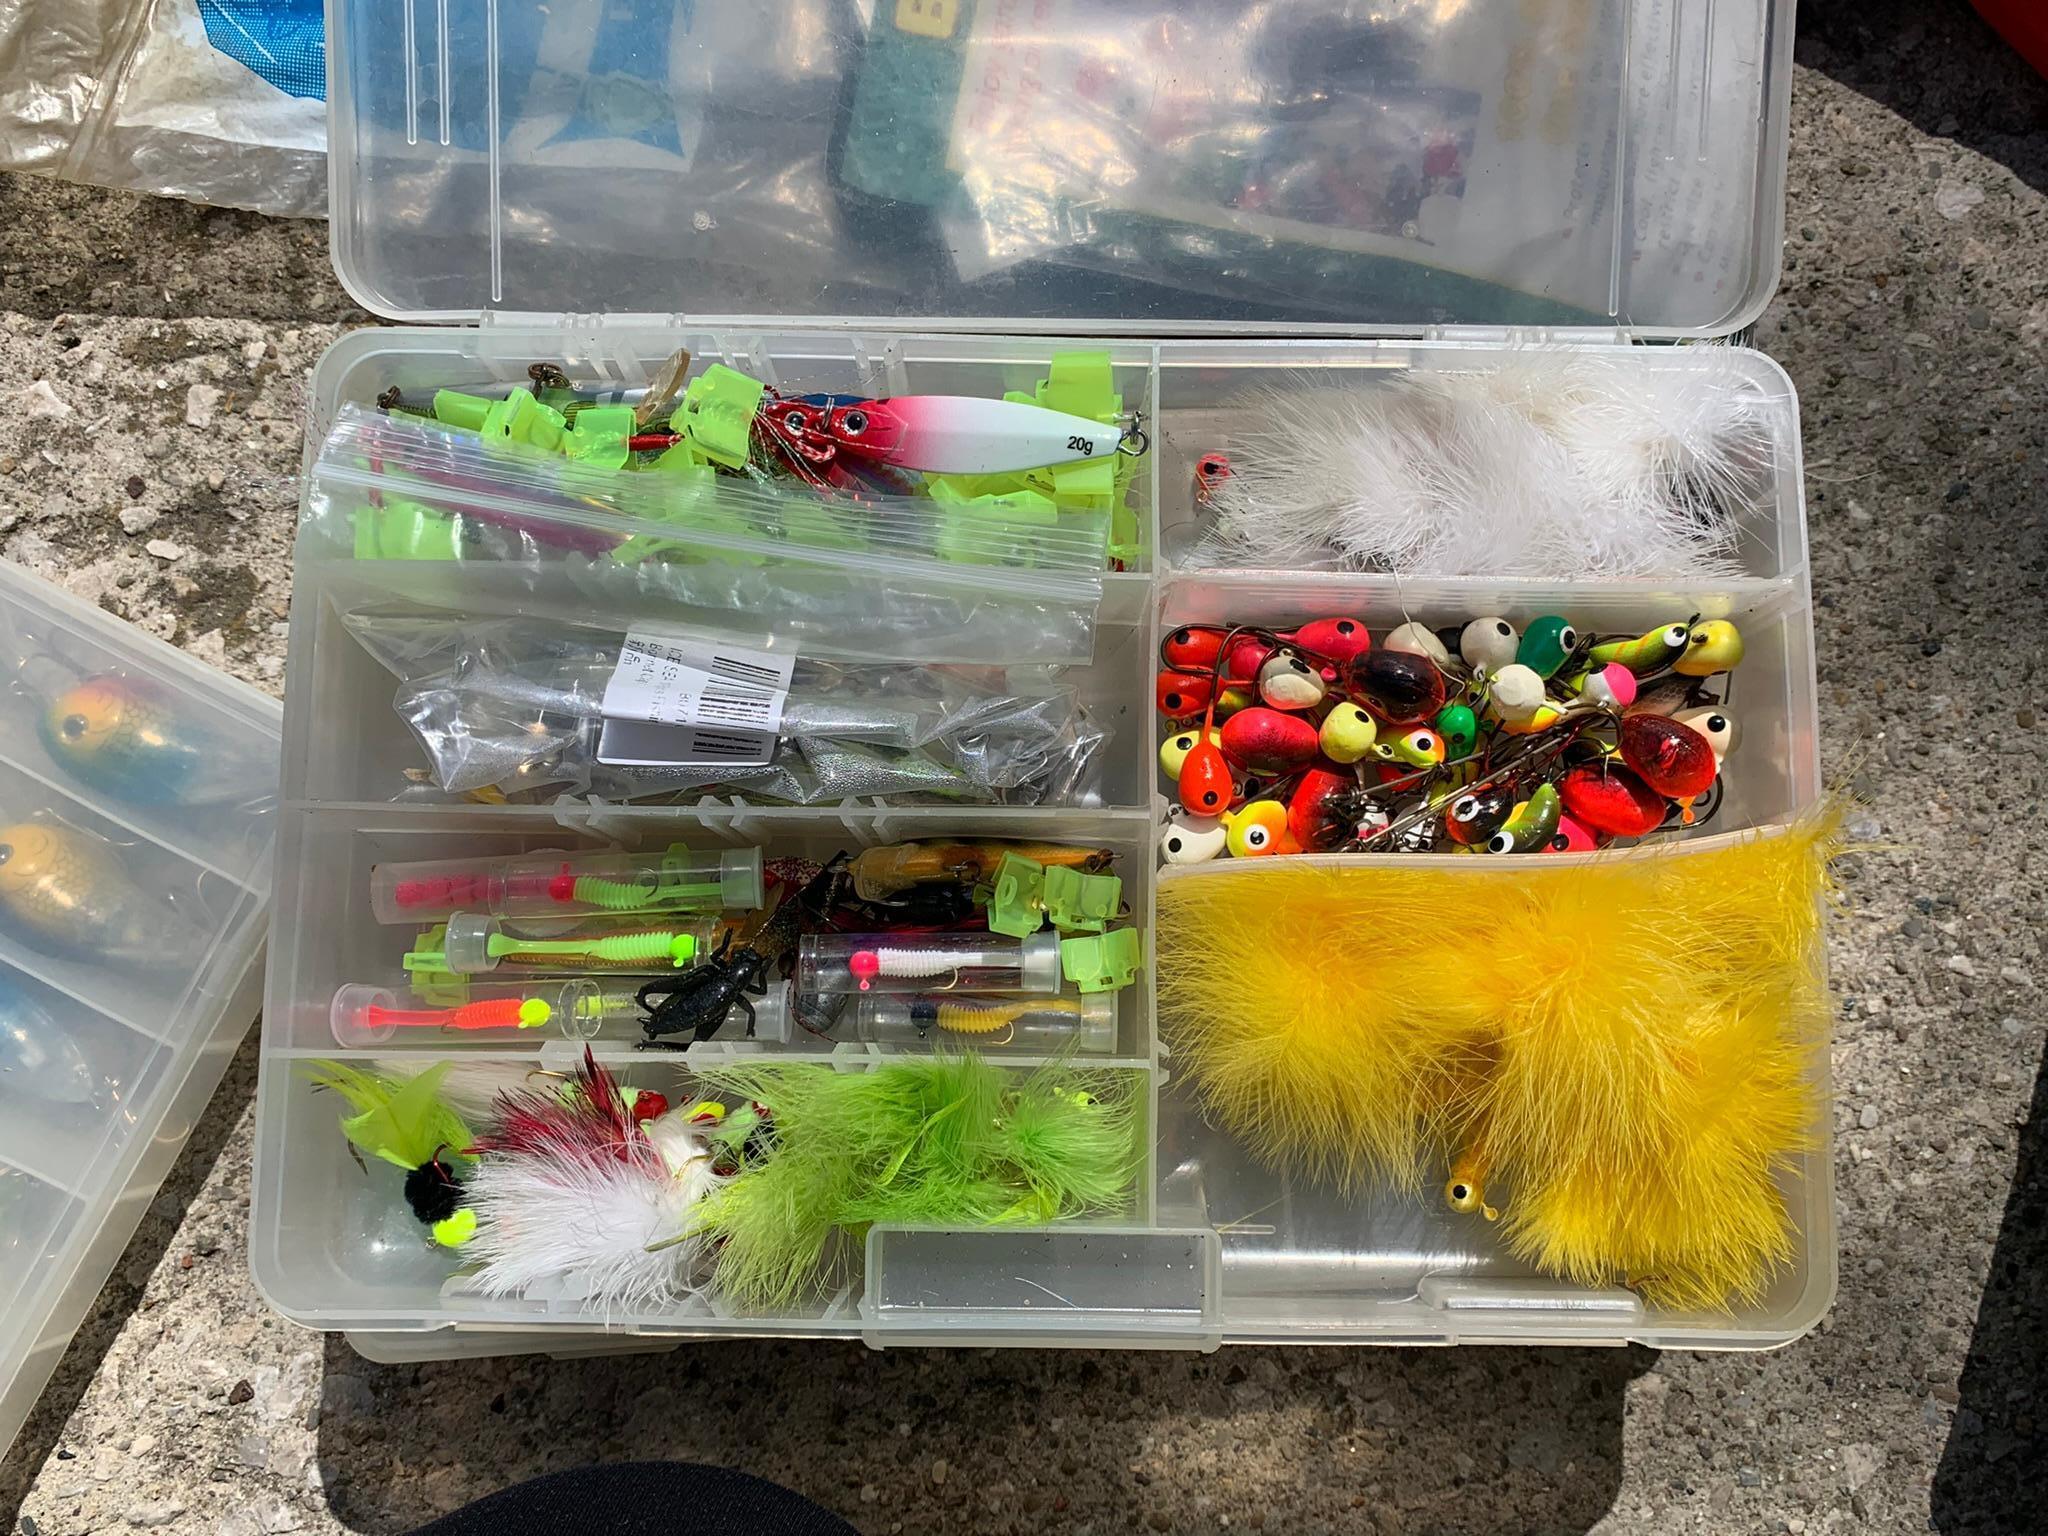 Large Group Fishing Lures, Tackle Boxes, Fishing Nets, Reels & More